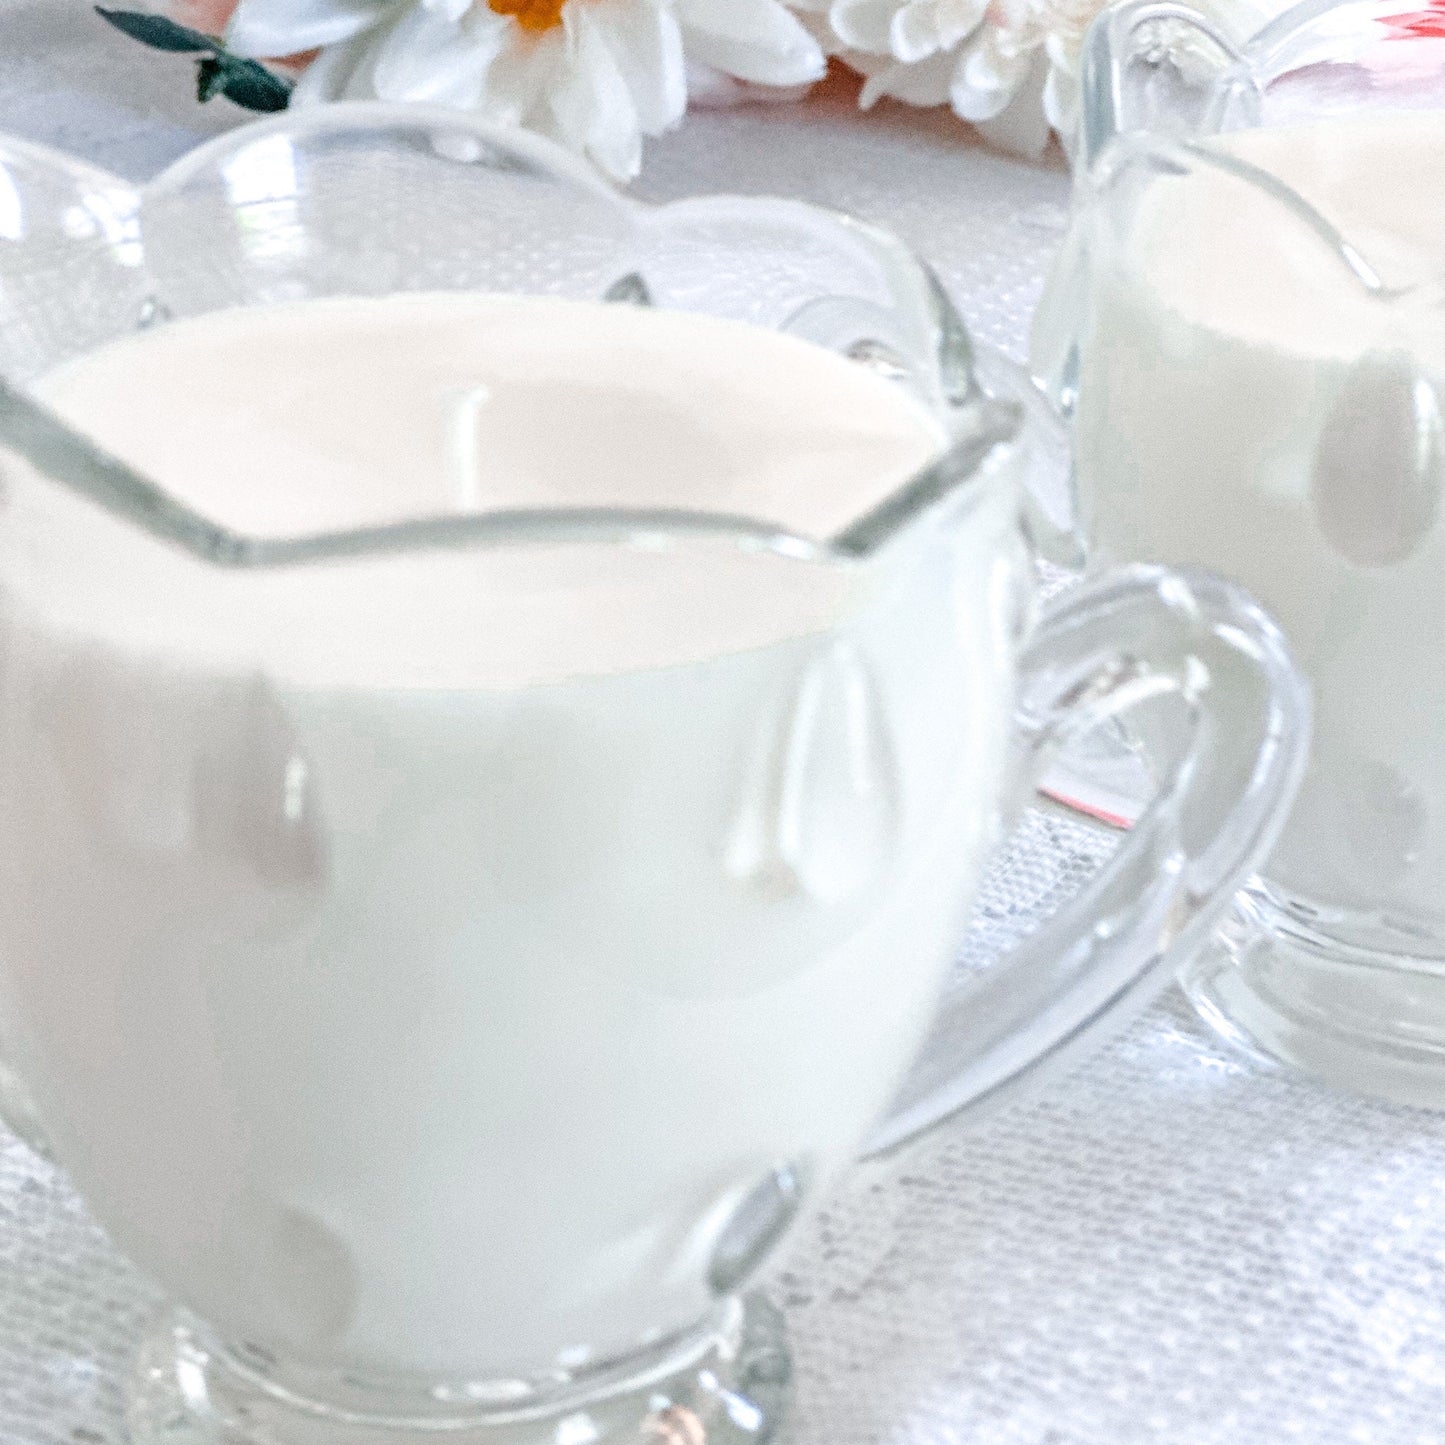 Moonflower Soy Candle in Vintage Indiana Glass Sugar & Creamer Set